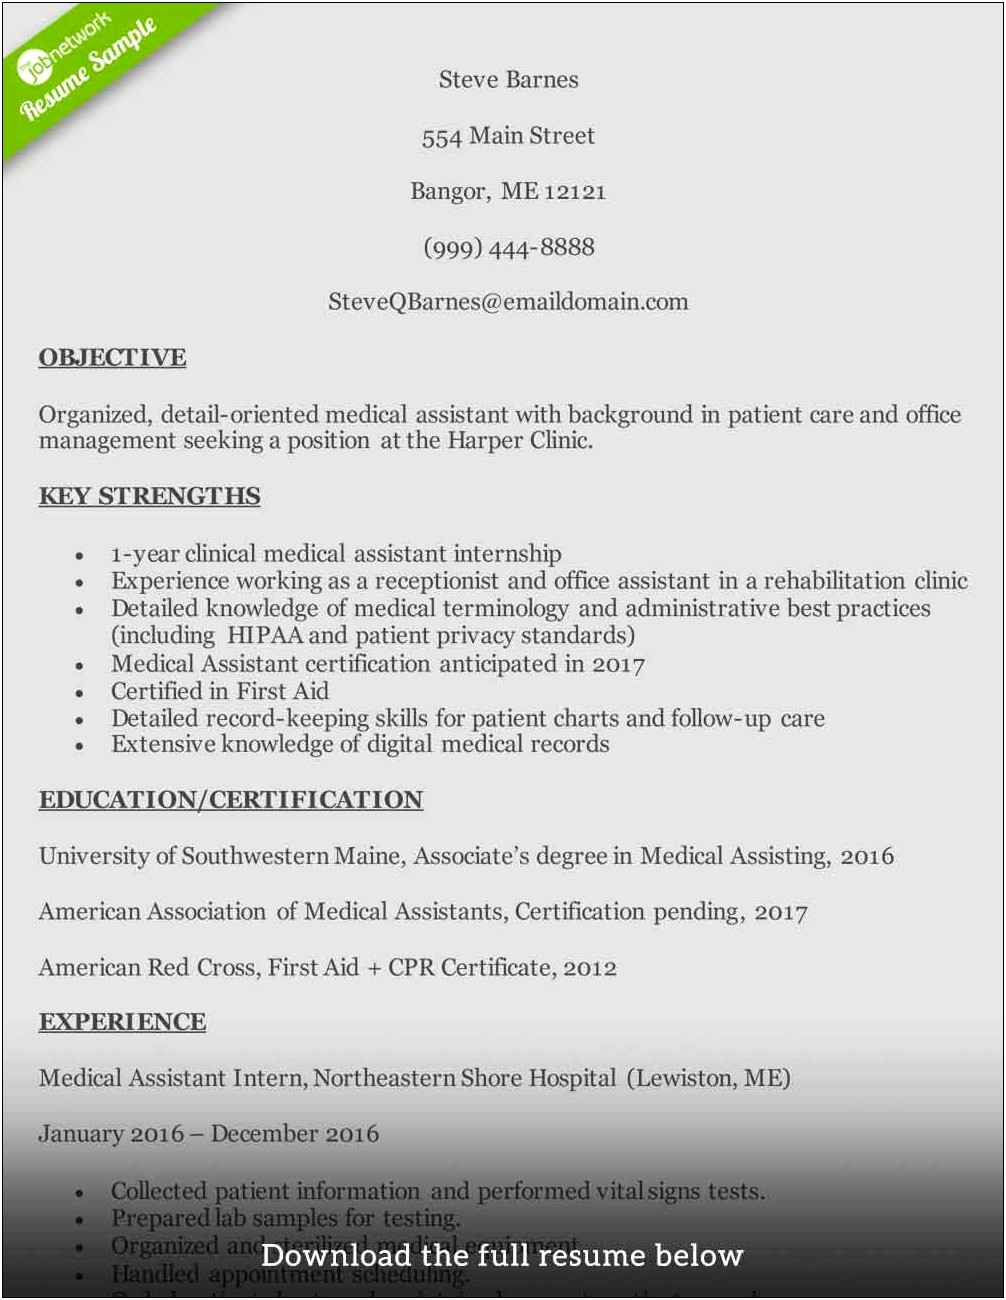 Resume For Medical Assistant Without Experience